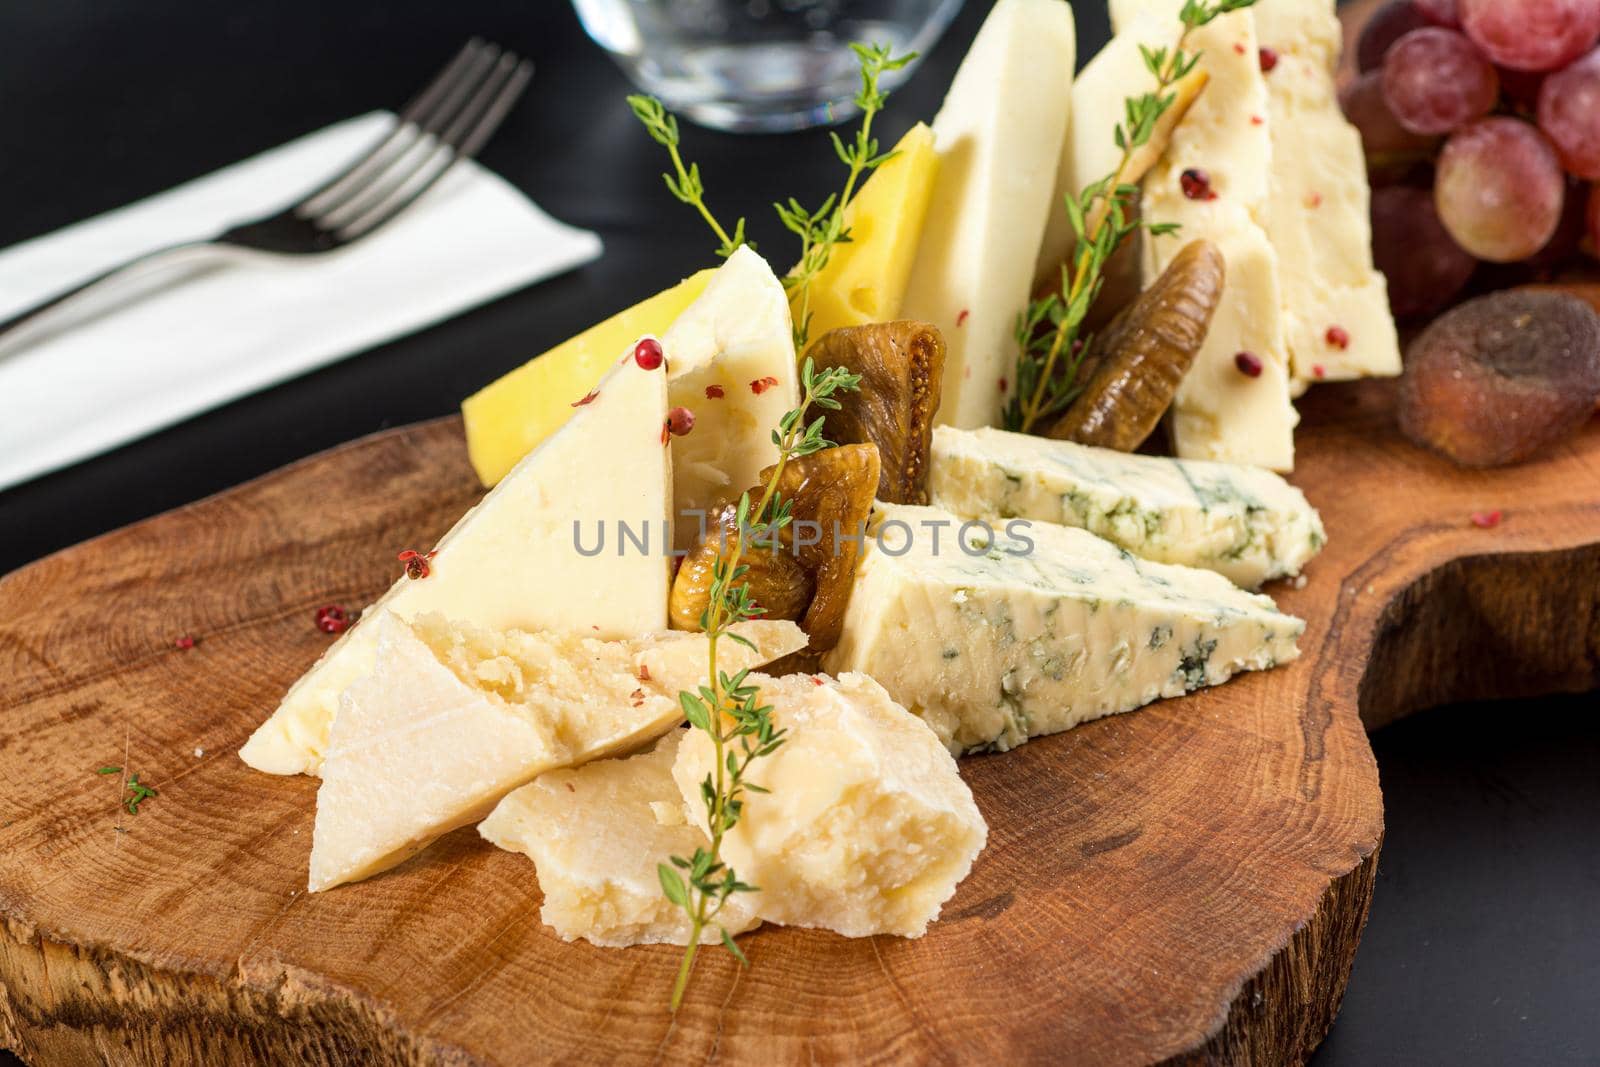 Cheese plate served with grapes, jam, figs, crackers and walnuts on a dark stone background